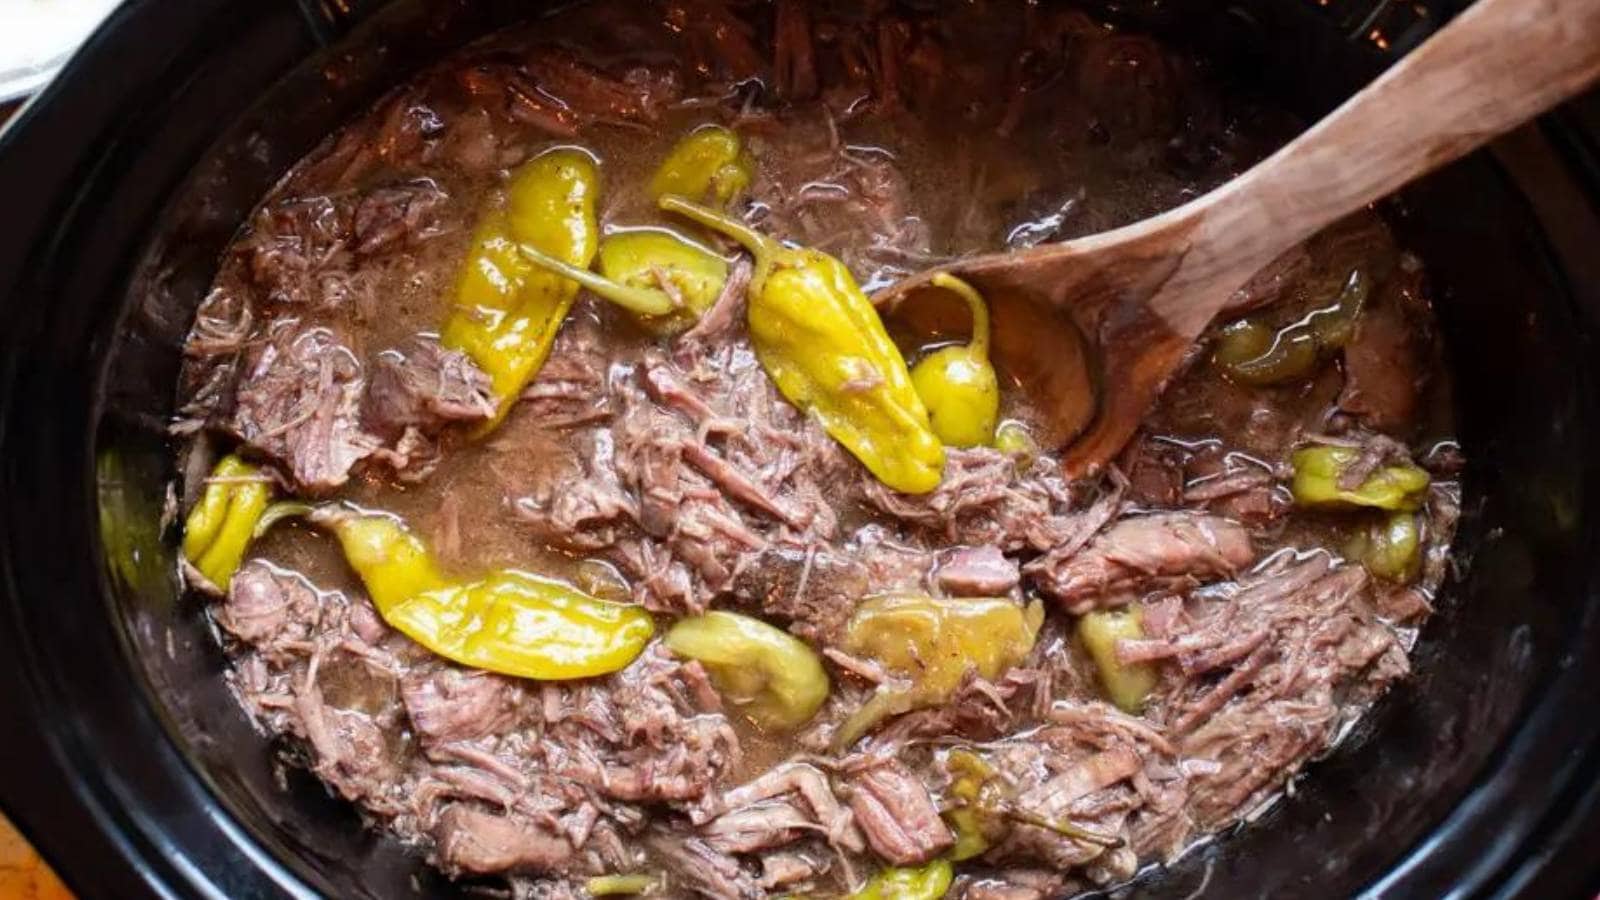 Mississippi Pot Roast recipe by The Magical Slow Cooker.